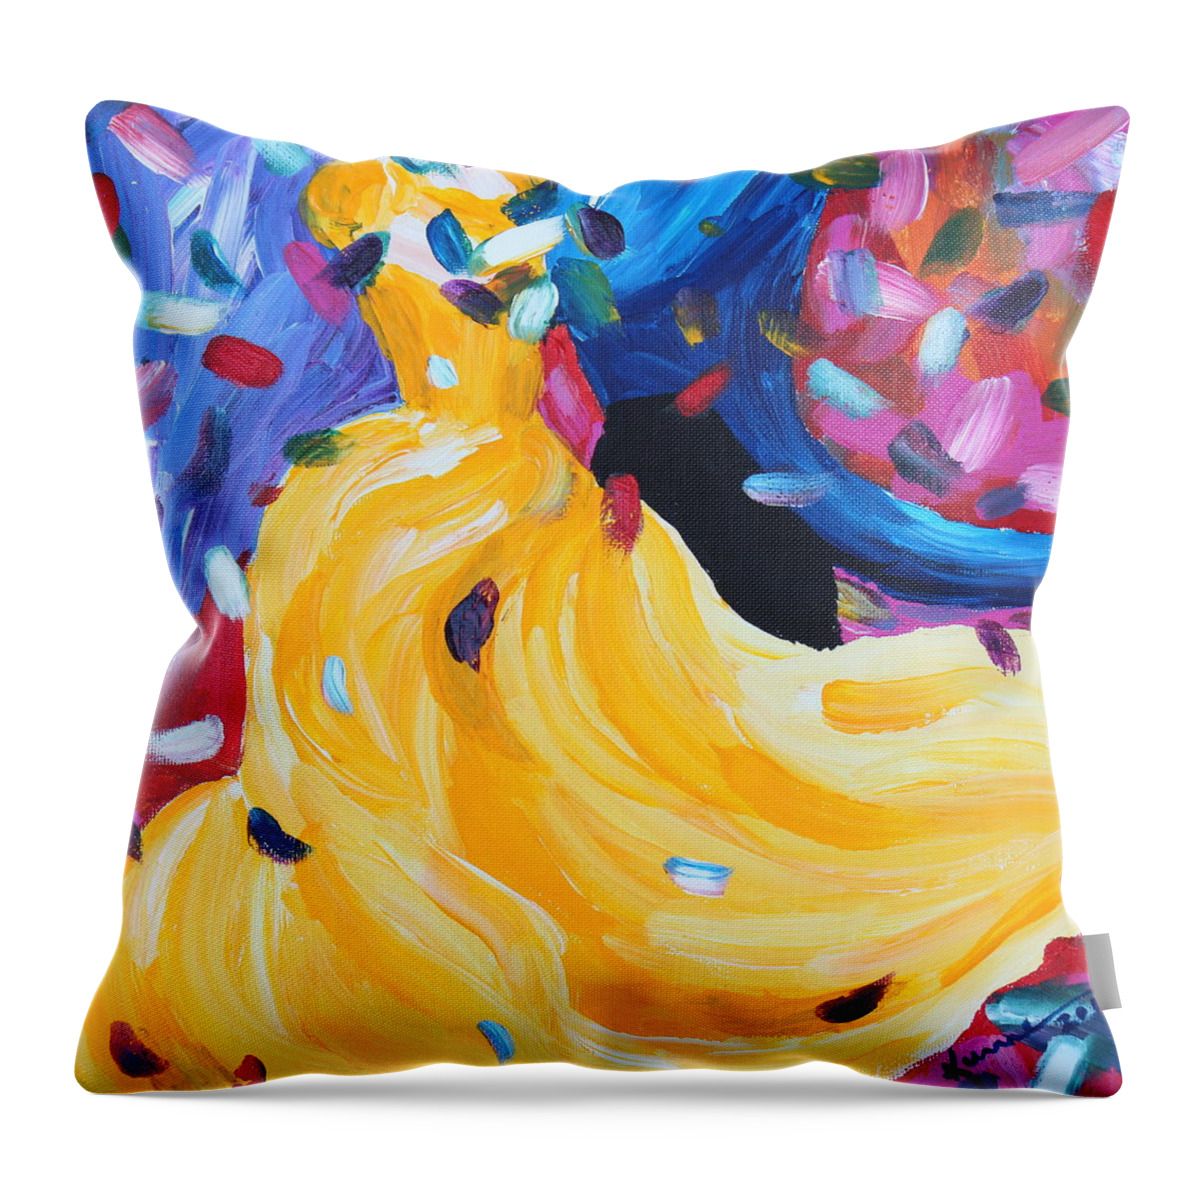 Quickstep Throw Pillow featuring the painting Quickstep by Kume Bryant